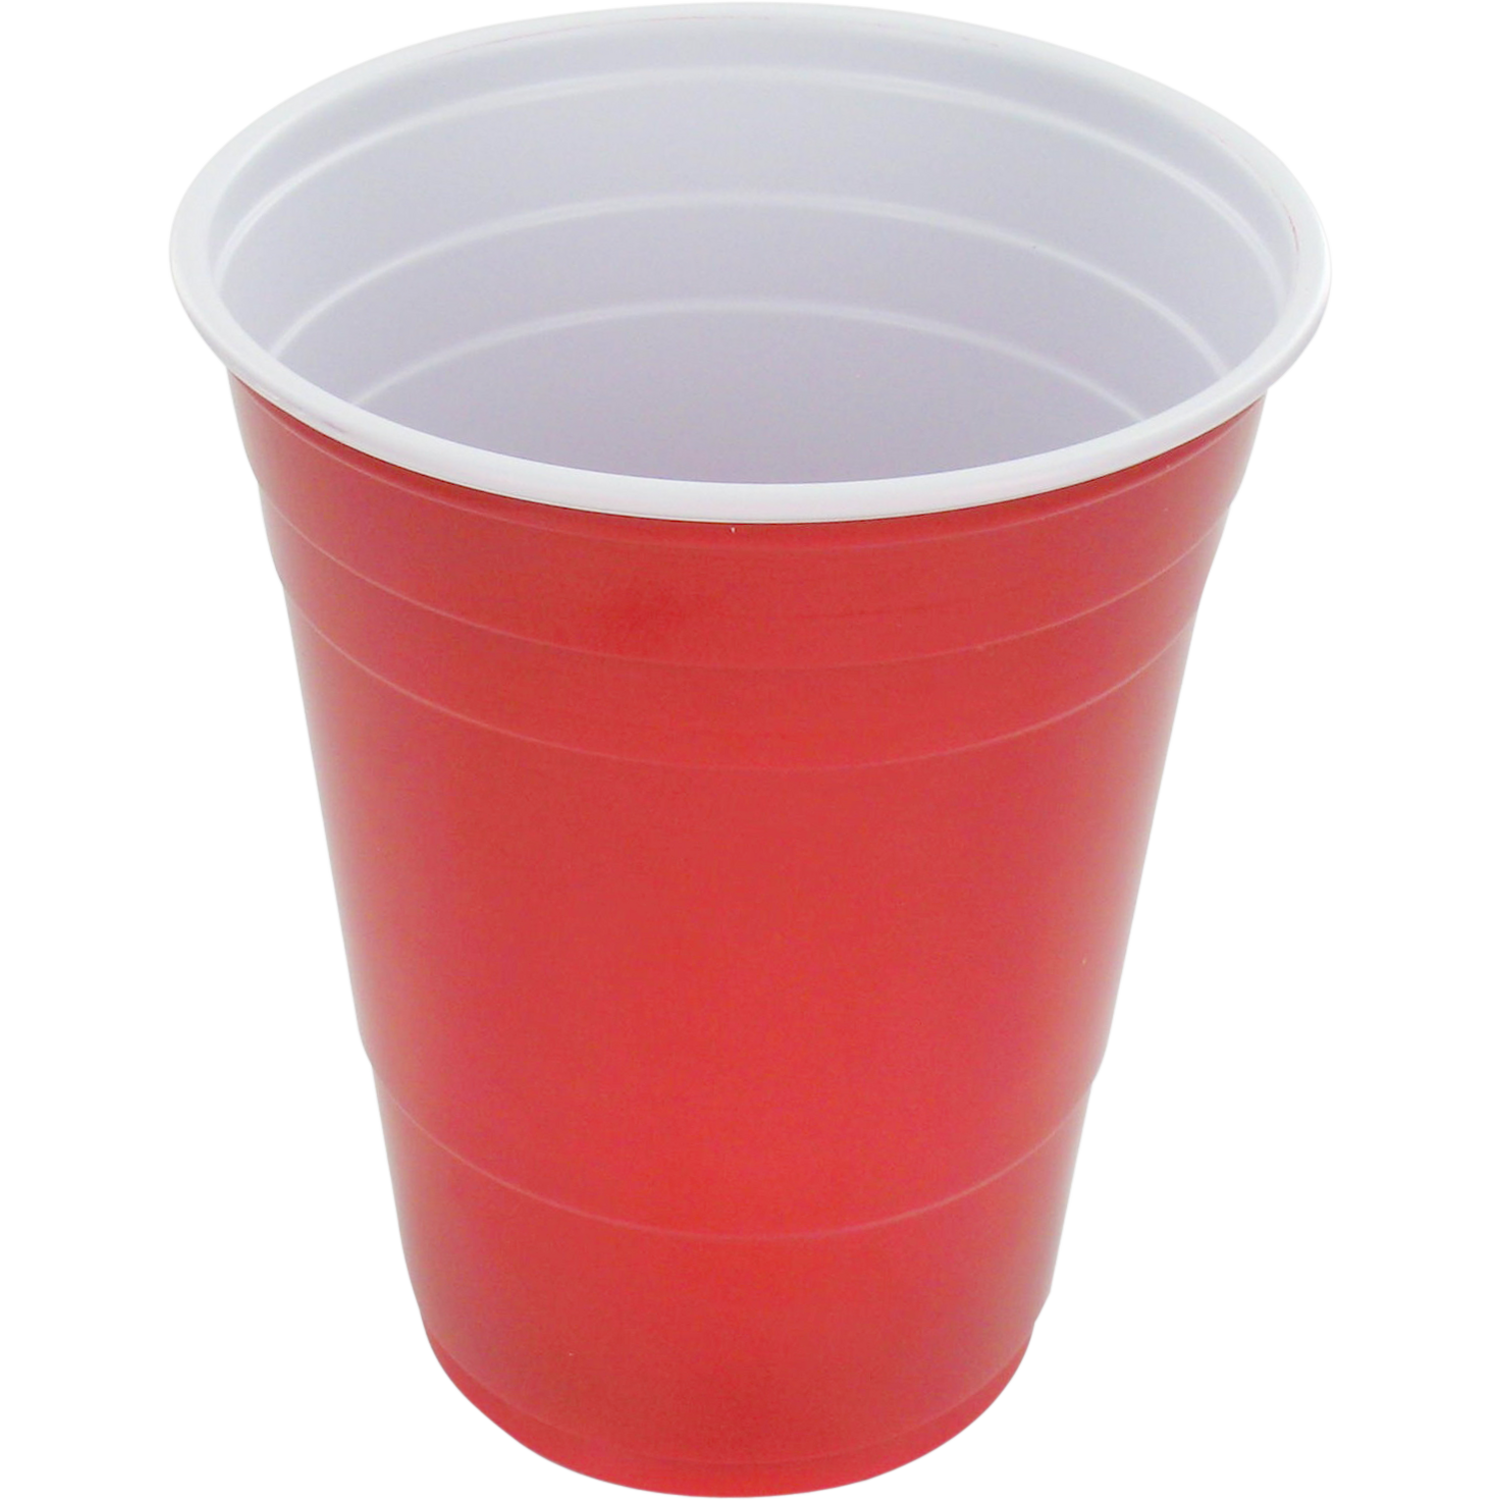  Partycup, PS, 473ml, 12oz, 400ml, 120mm, rood 1